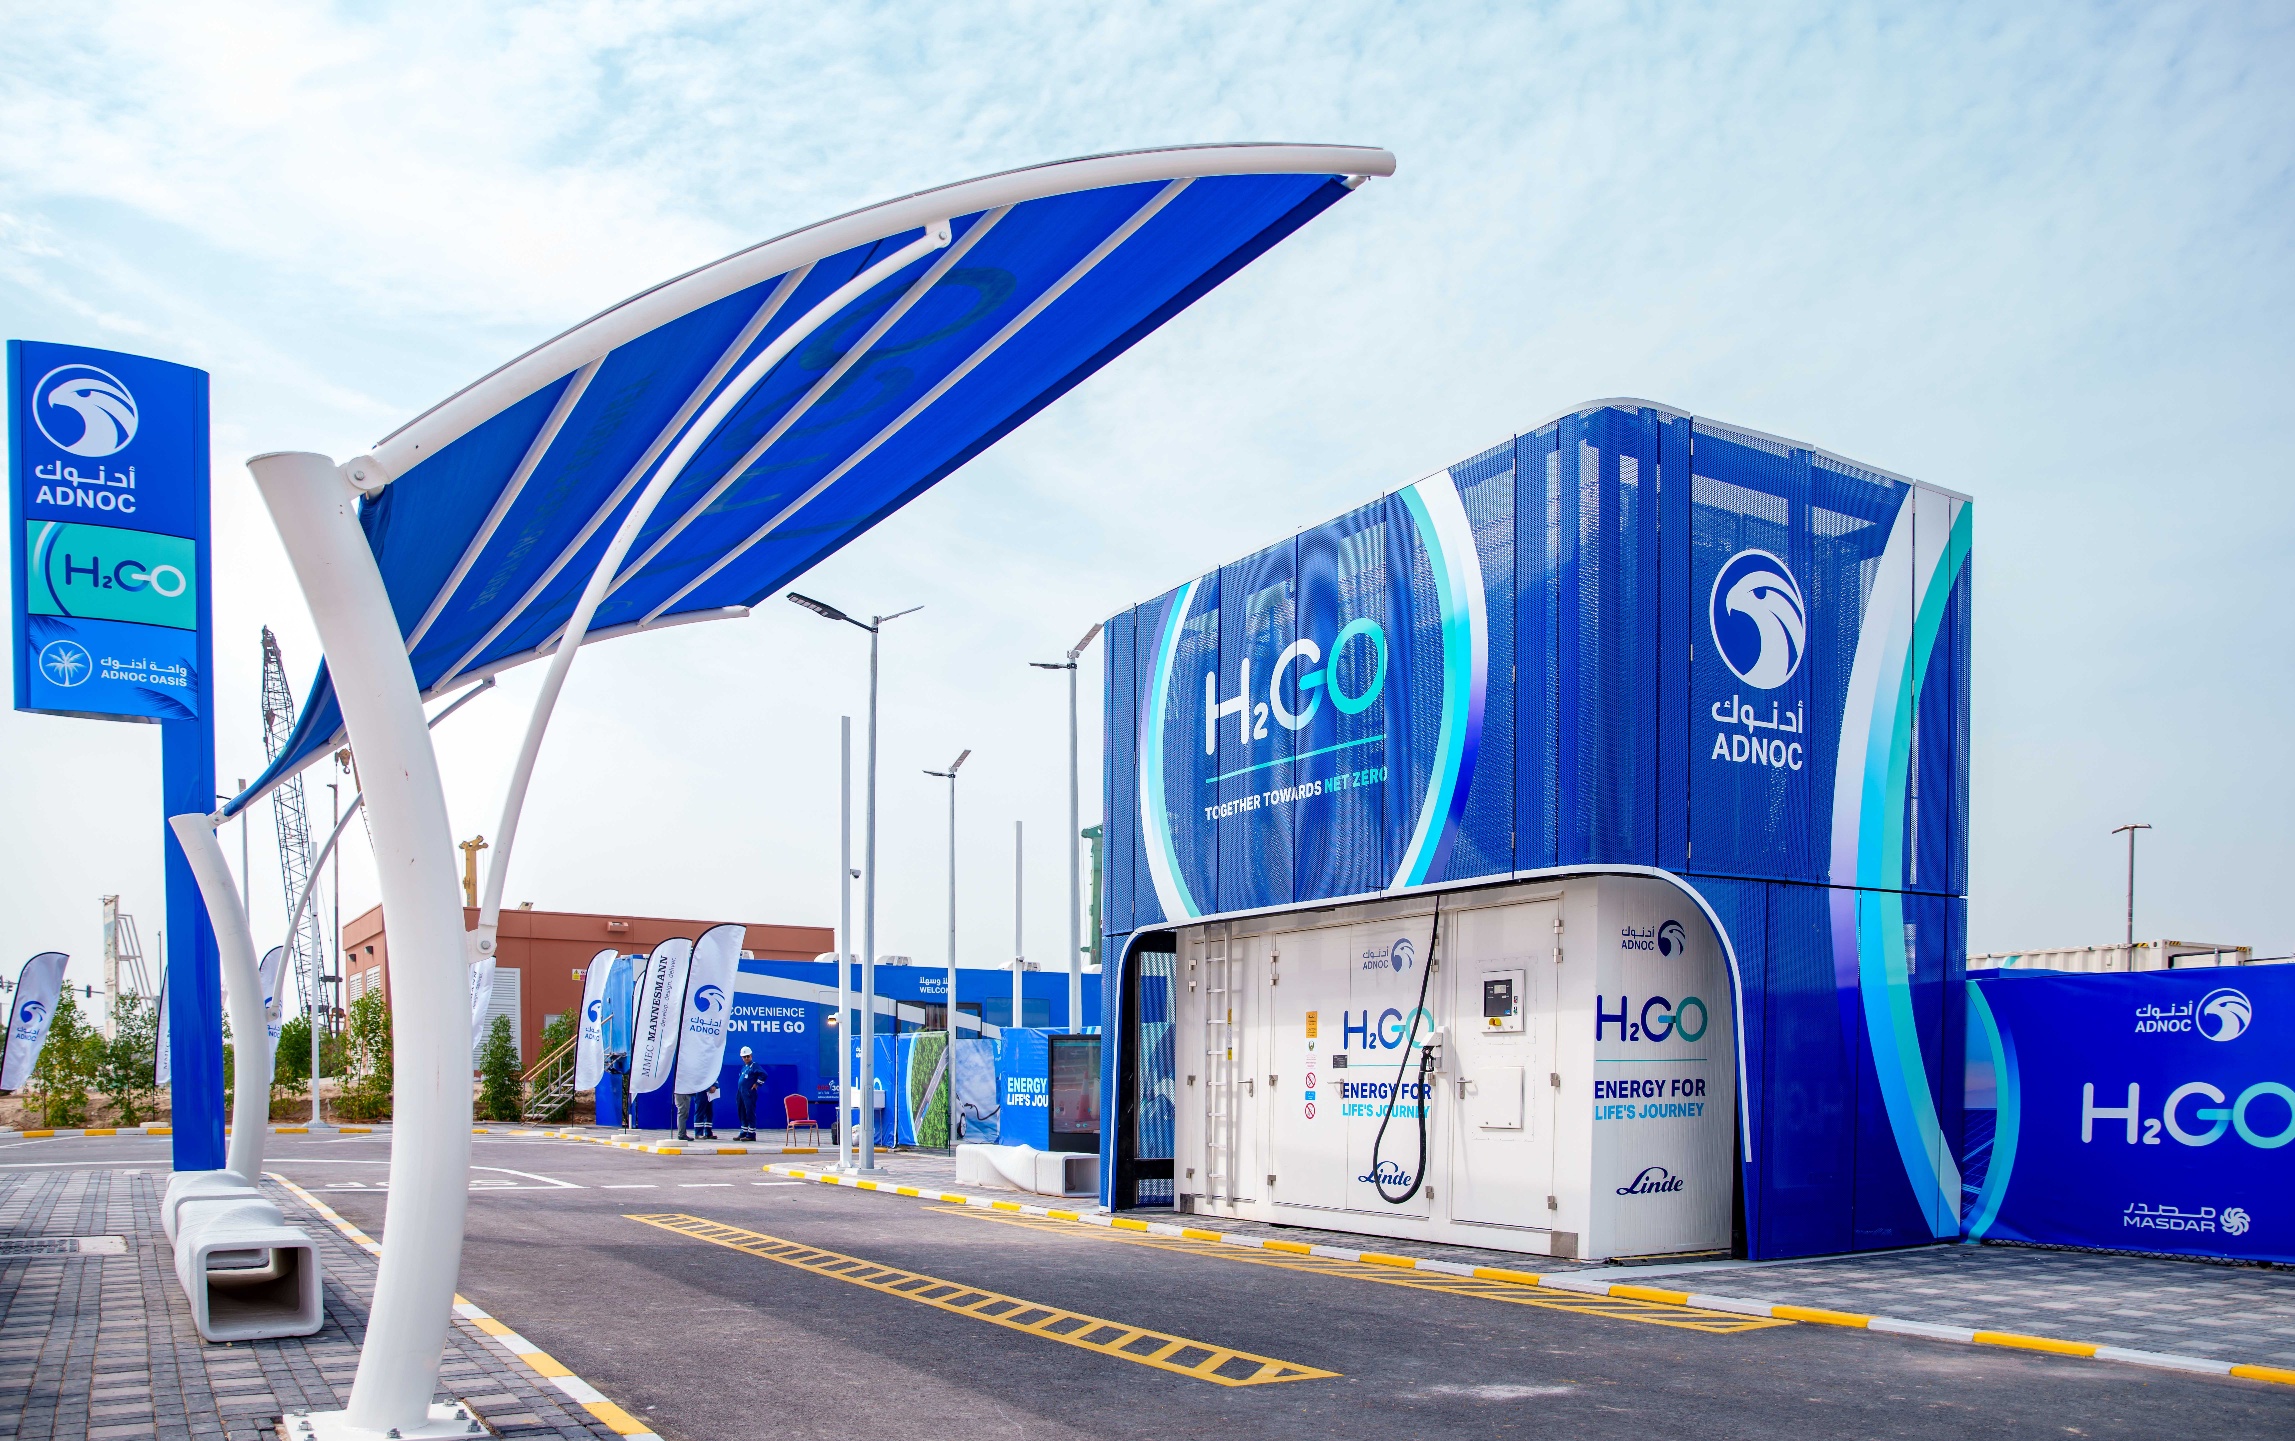 ADNOC Opens The Region’s First High-Speed Green Hydrogen Refueling Pilot Station